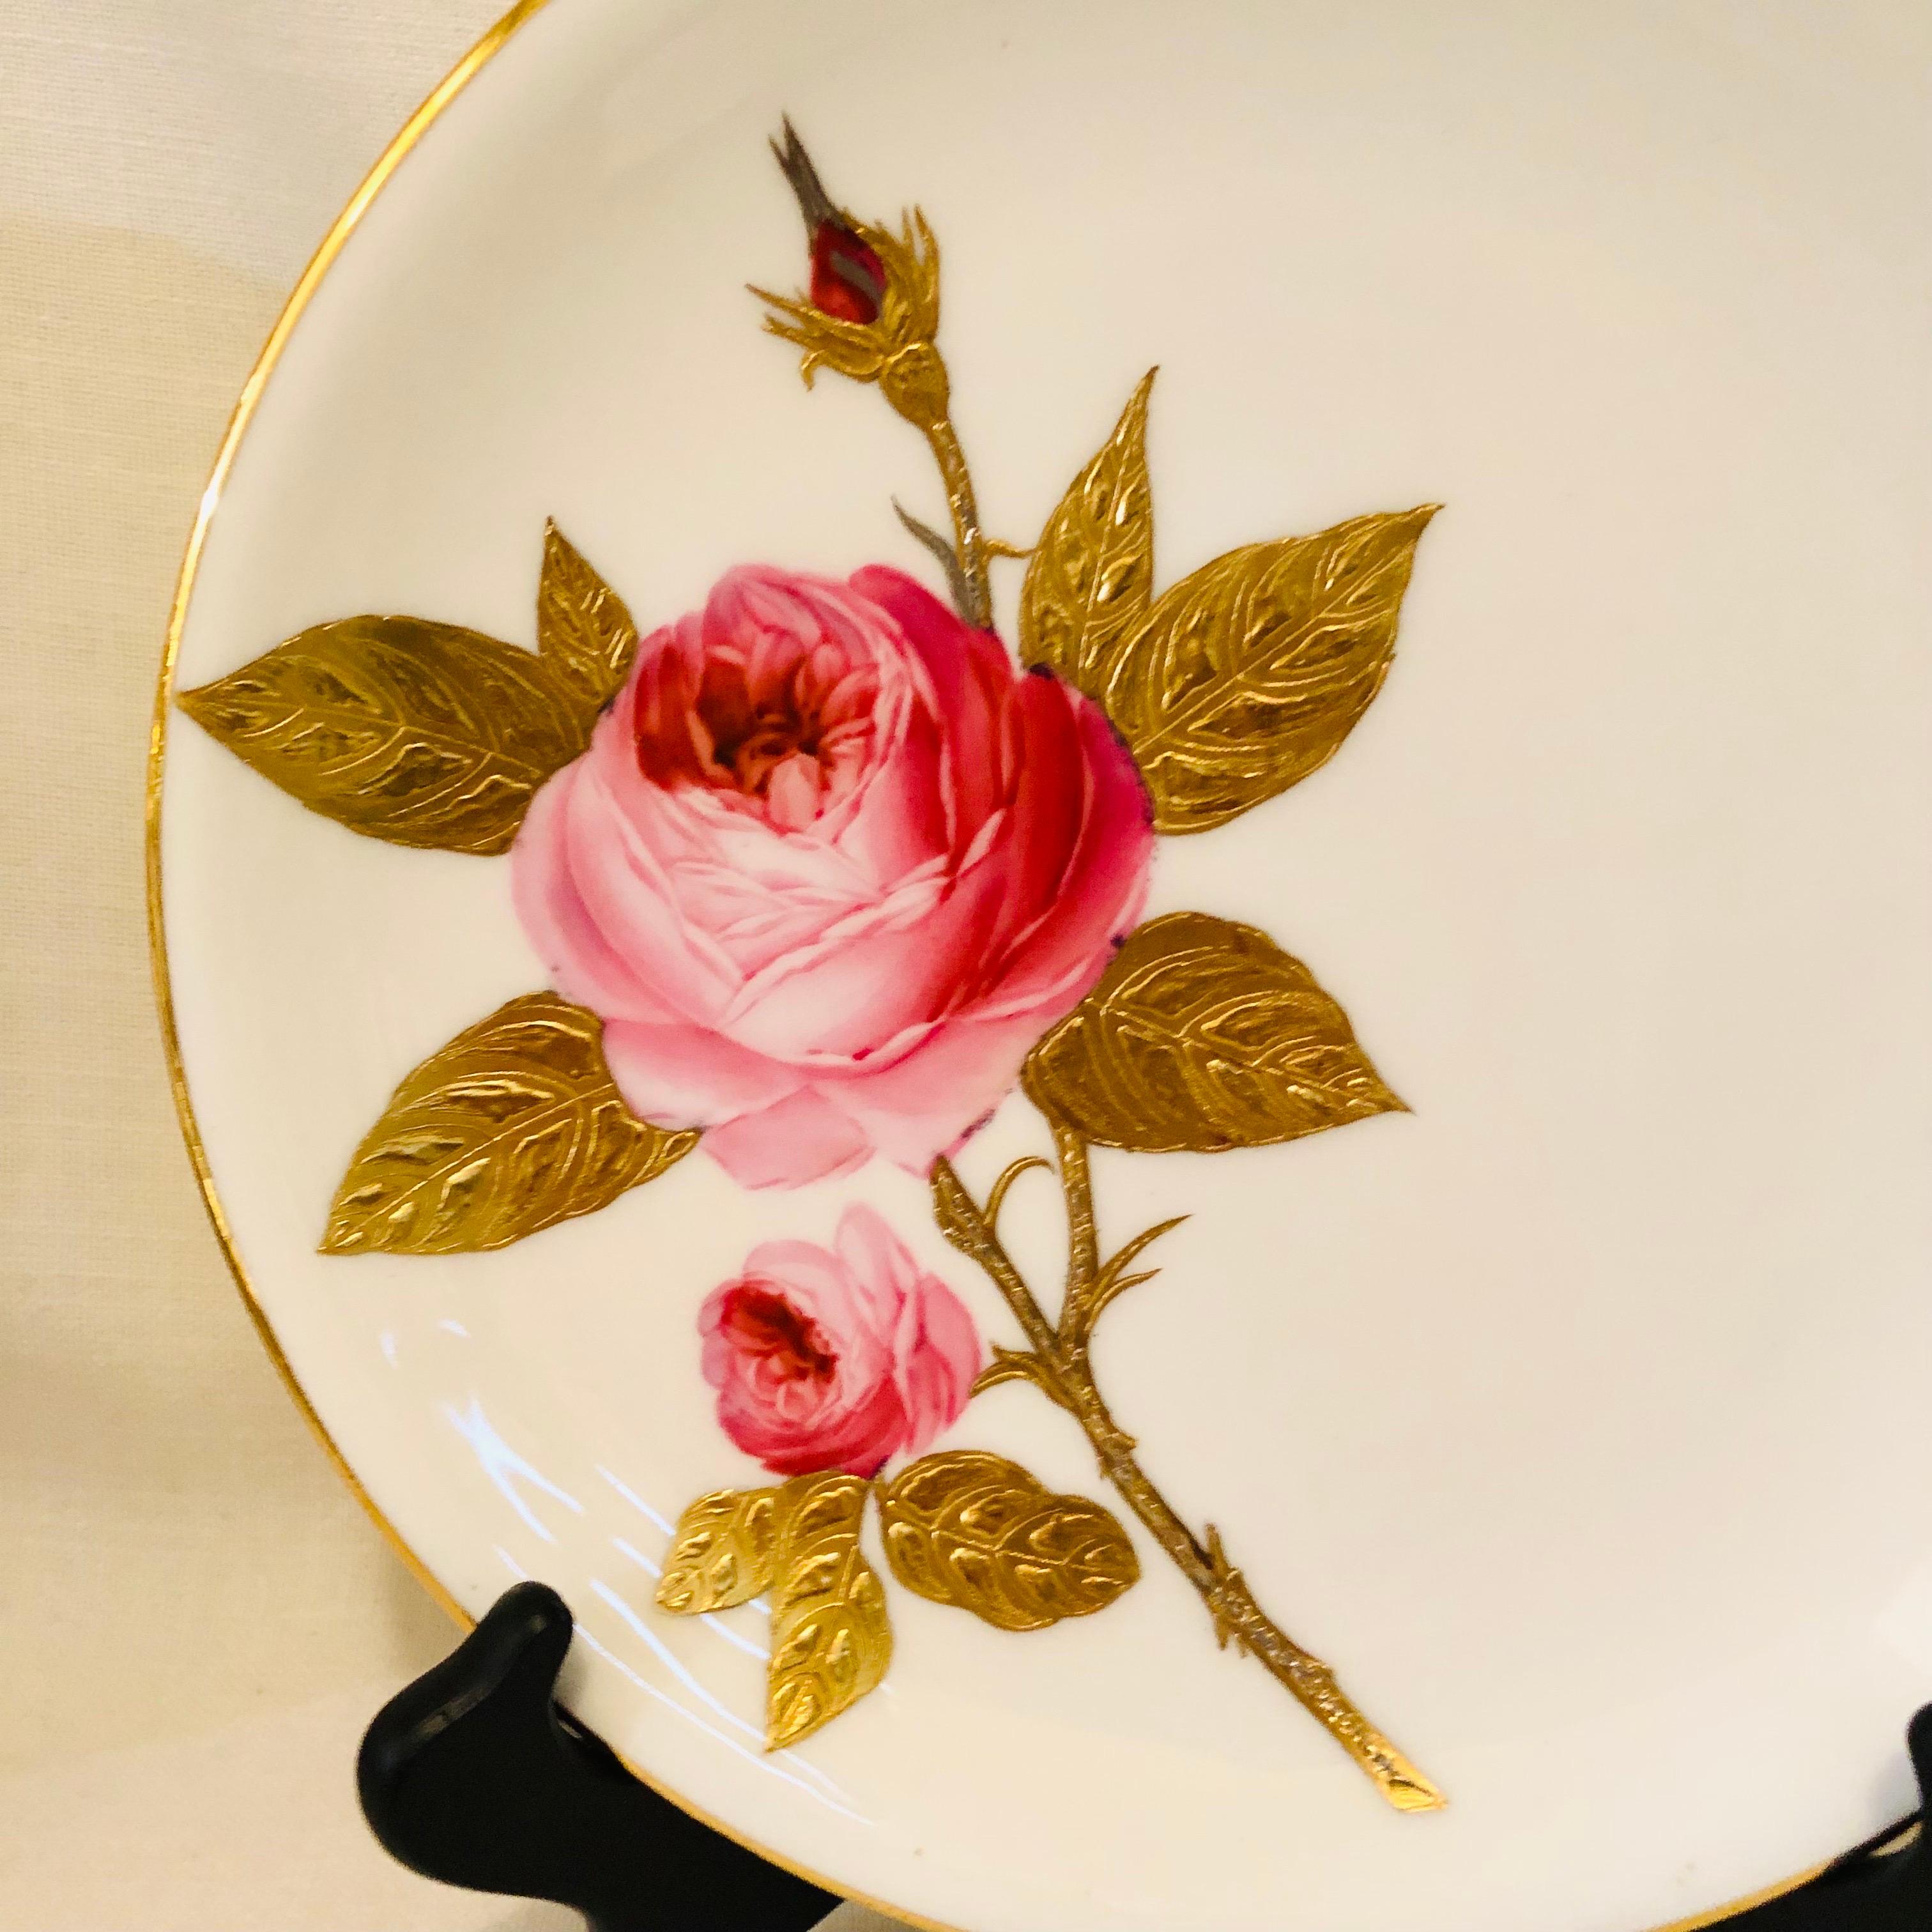 Minton Plates Each Painted With a Different Rose With Gold and Platinum Accents 10